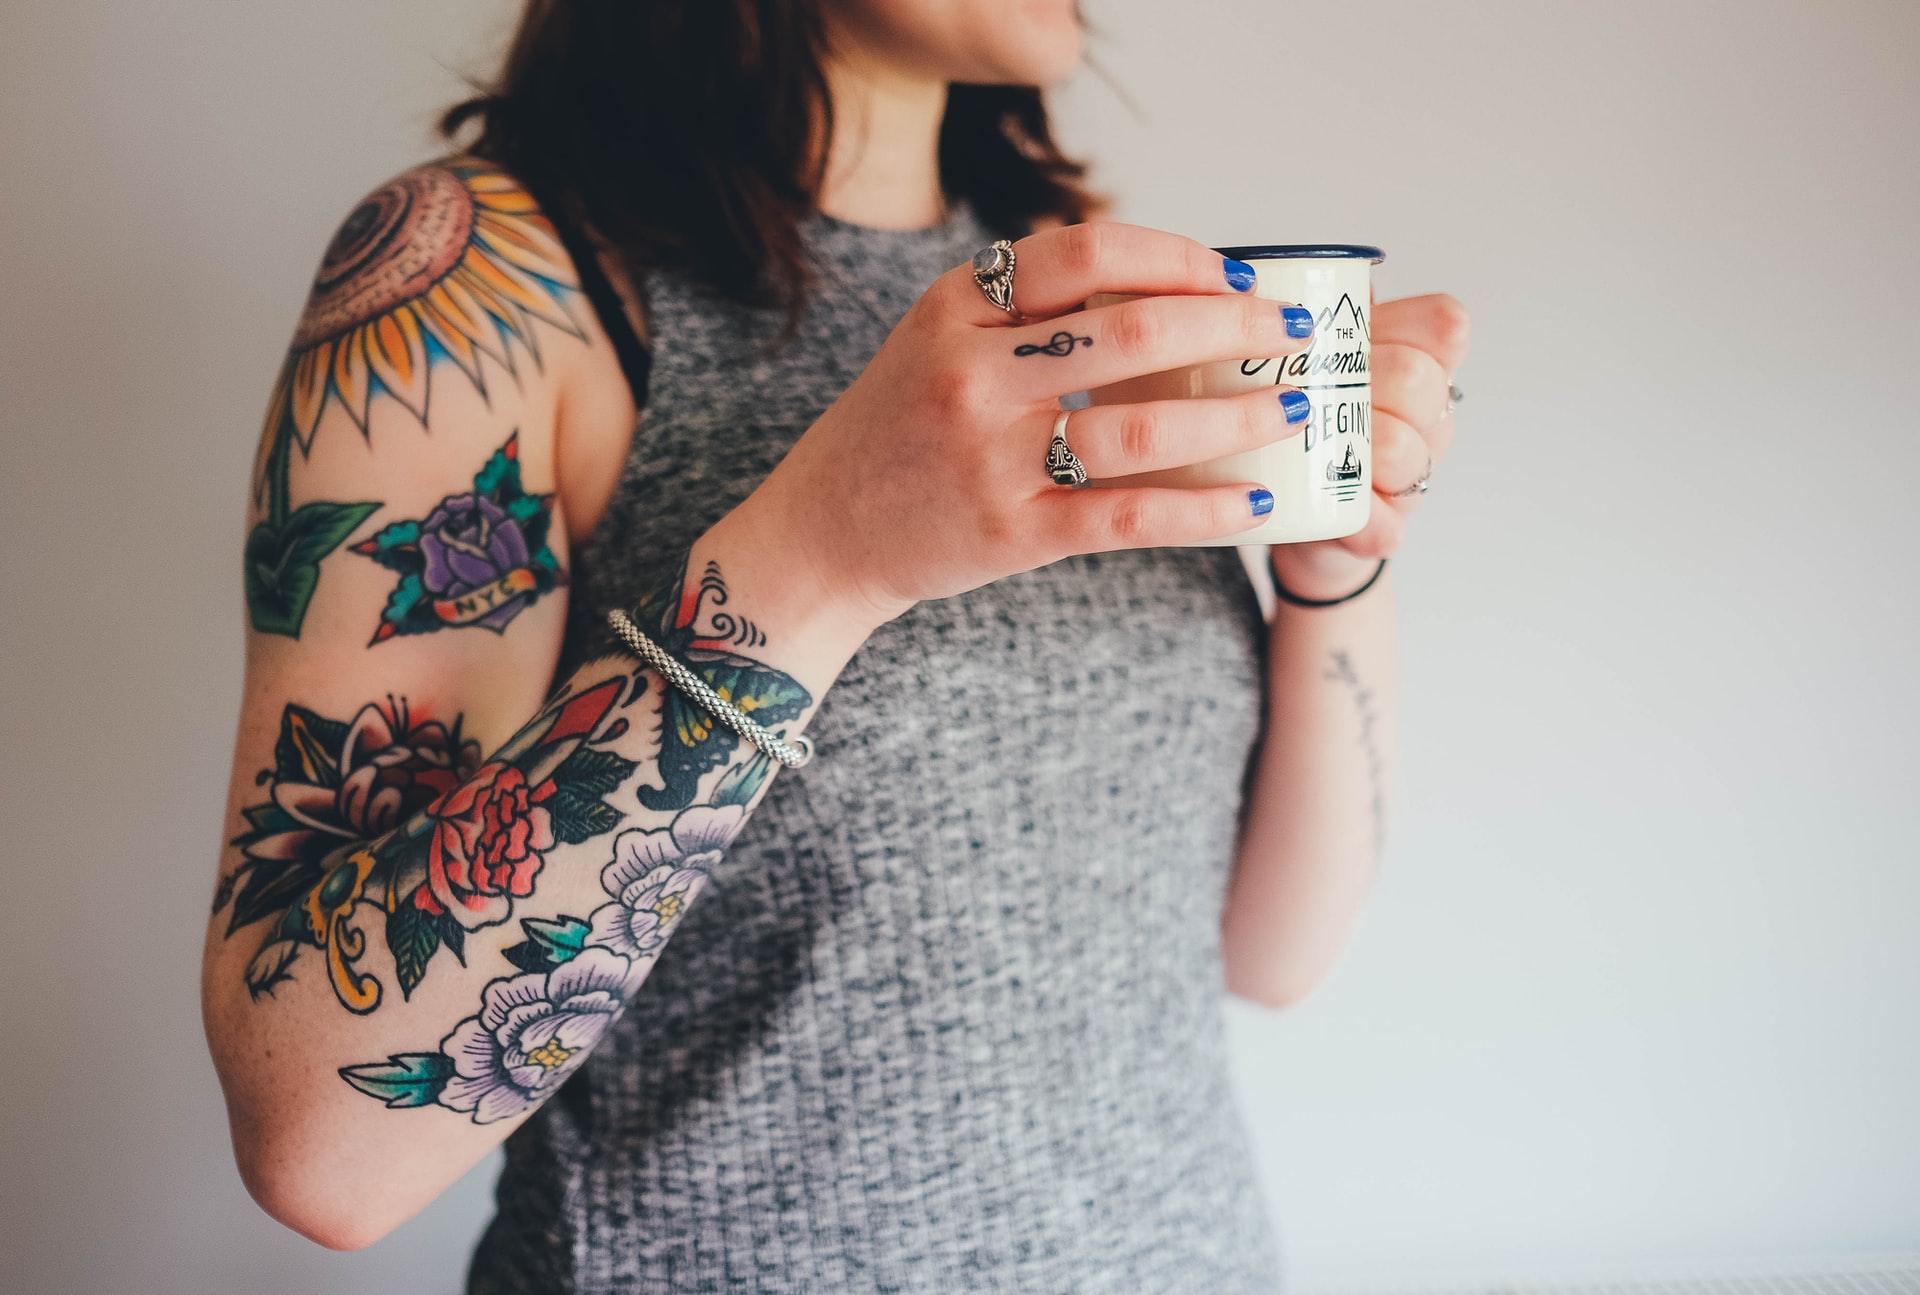 Tattoos perfect for women – learn about the unique symbolism!